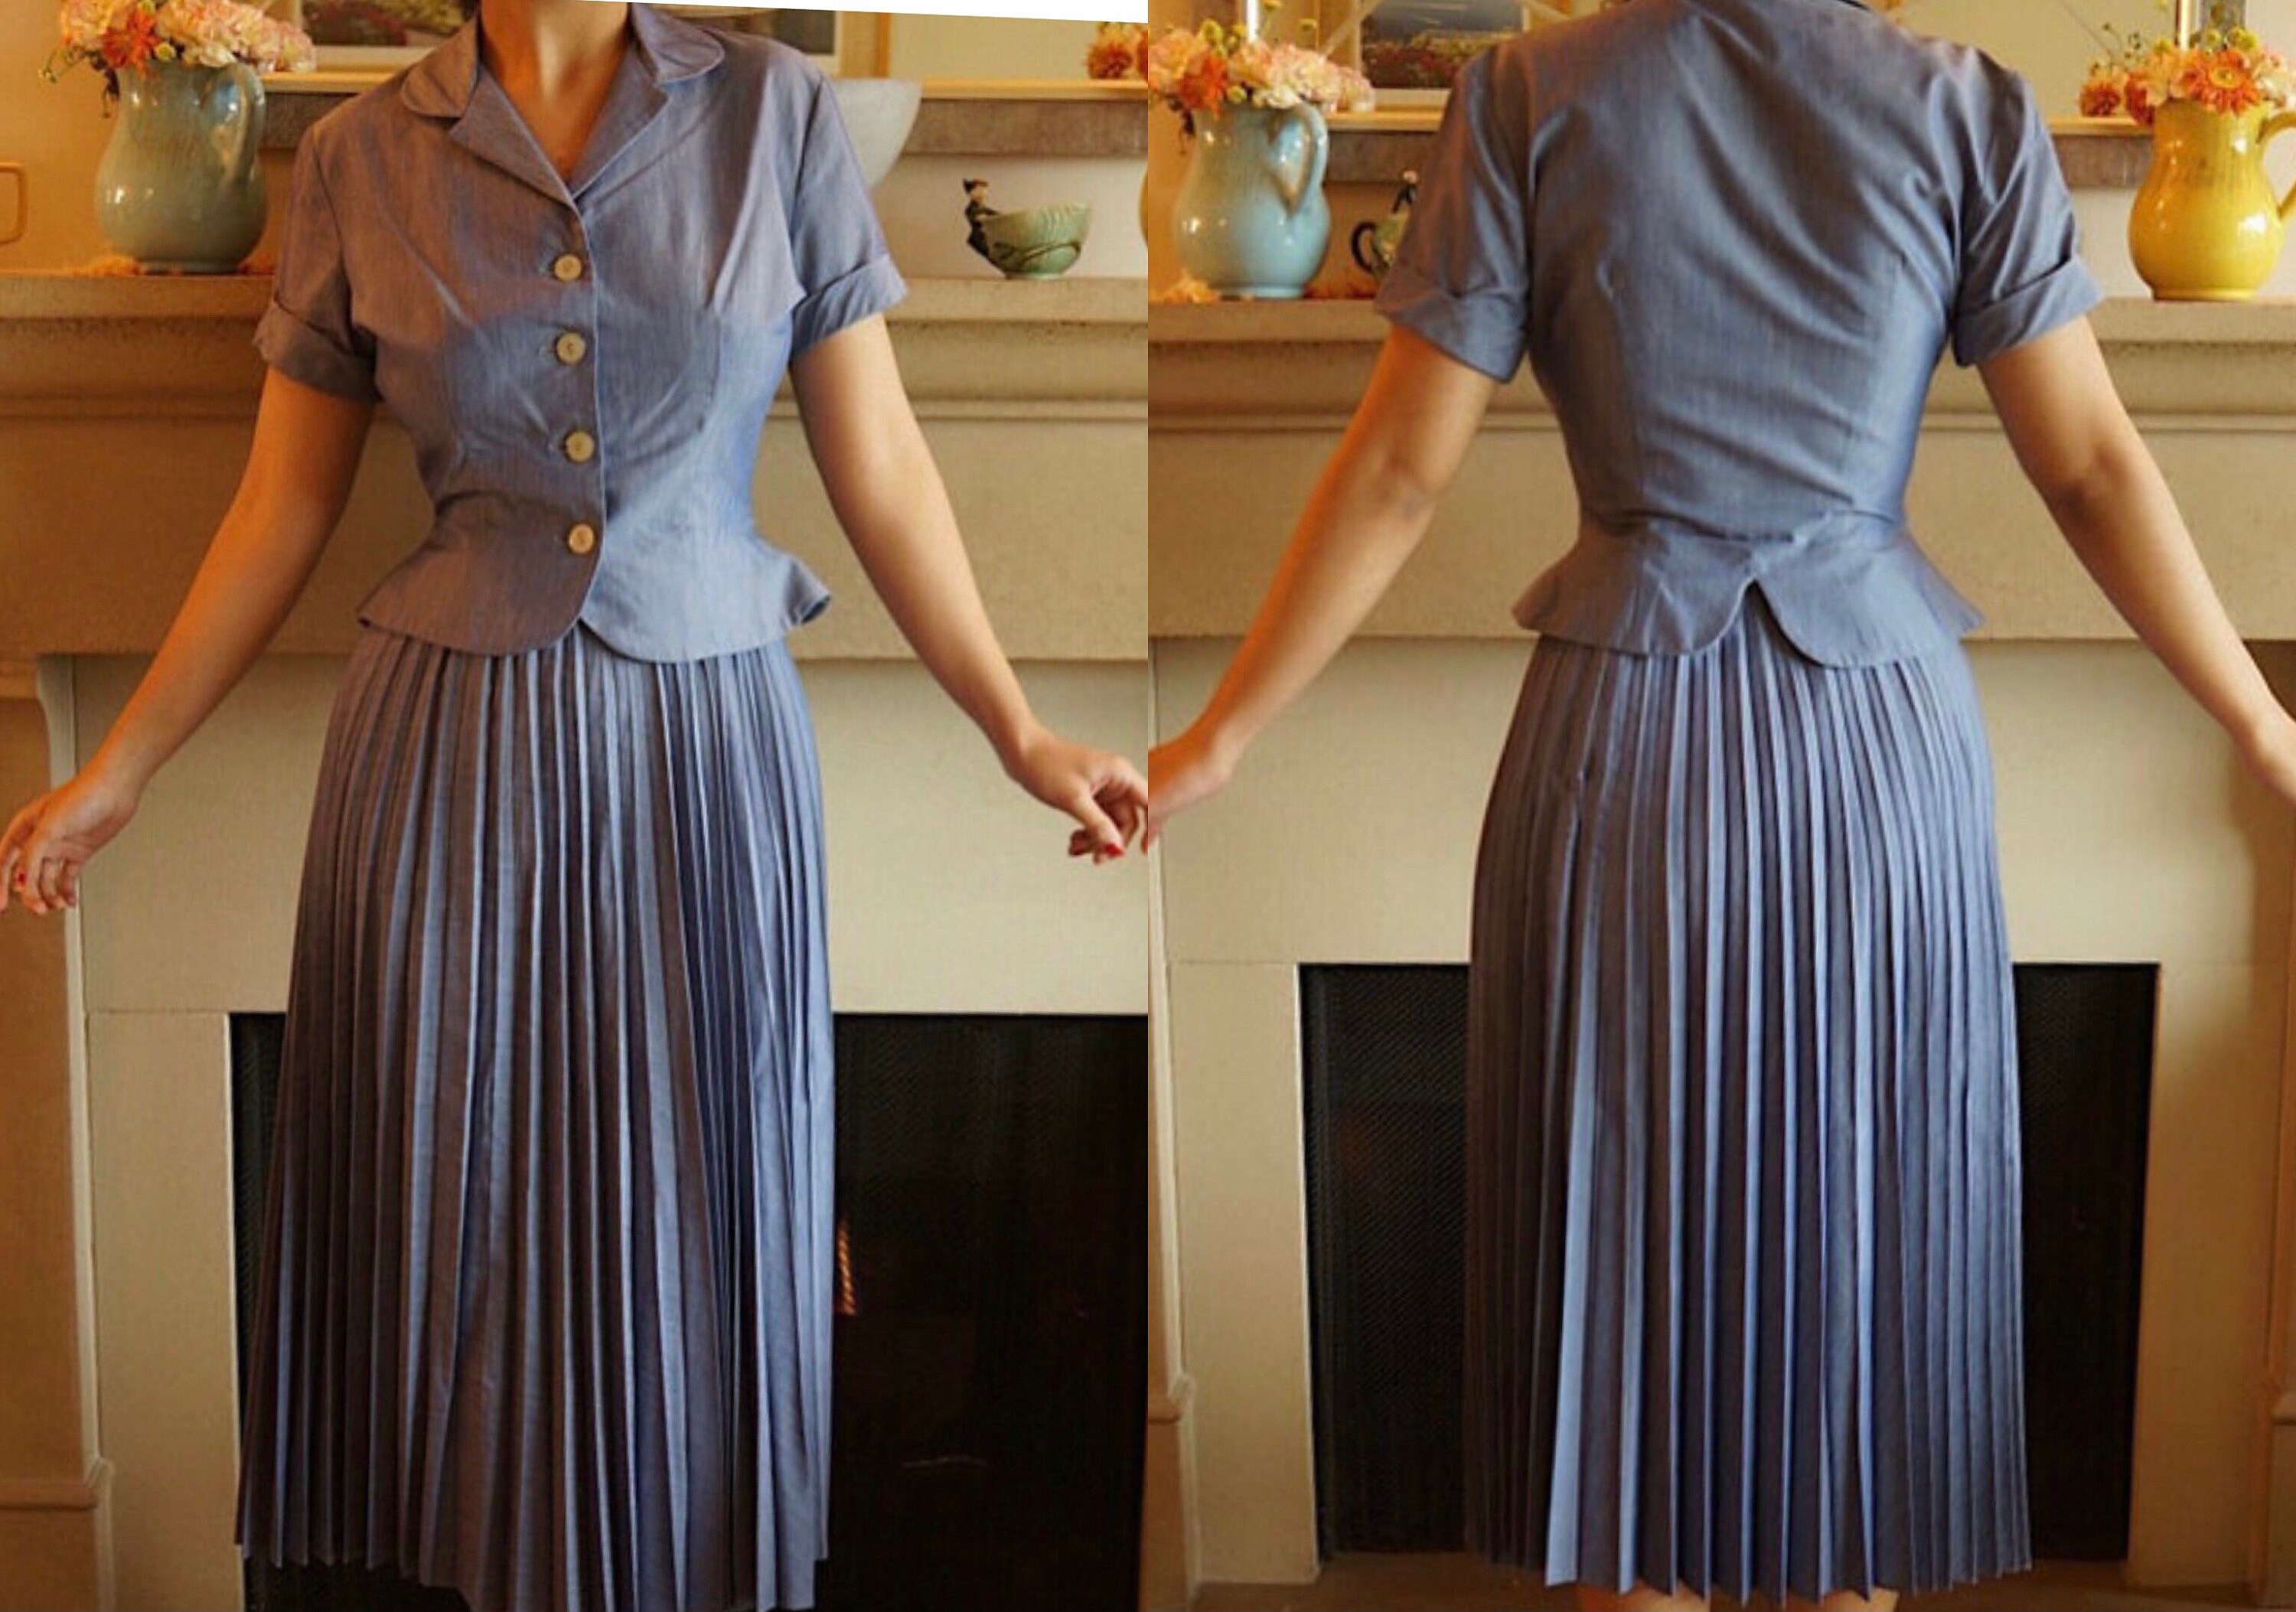 Deep Blue Marl Forties True Vintage Fitted Skirt Suit UK 10 Clothing Womens Clothing Dresses 